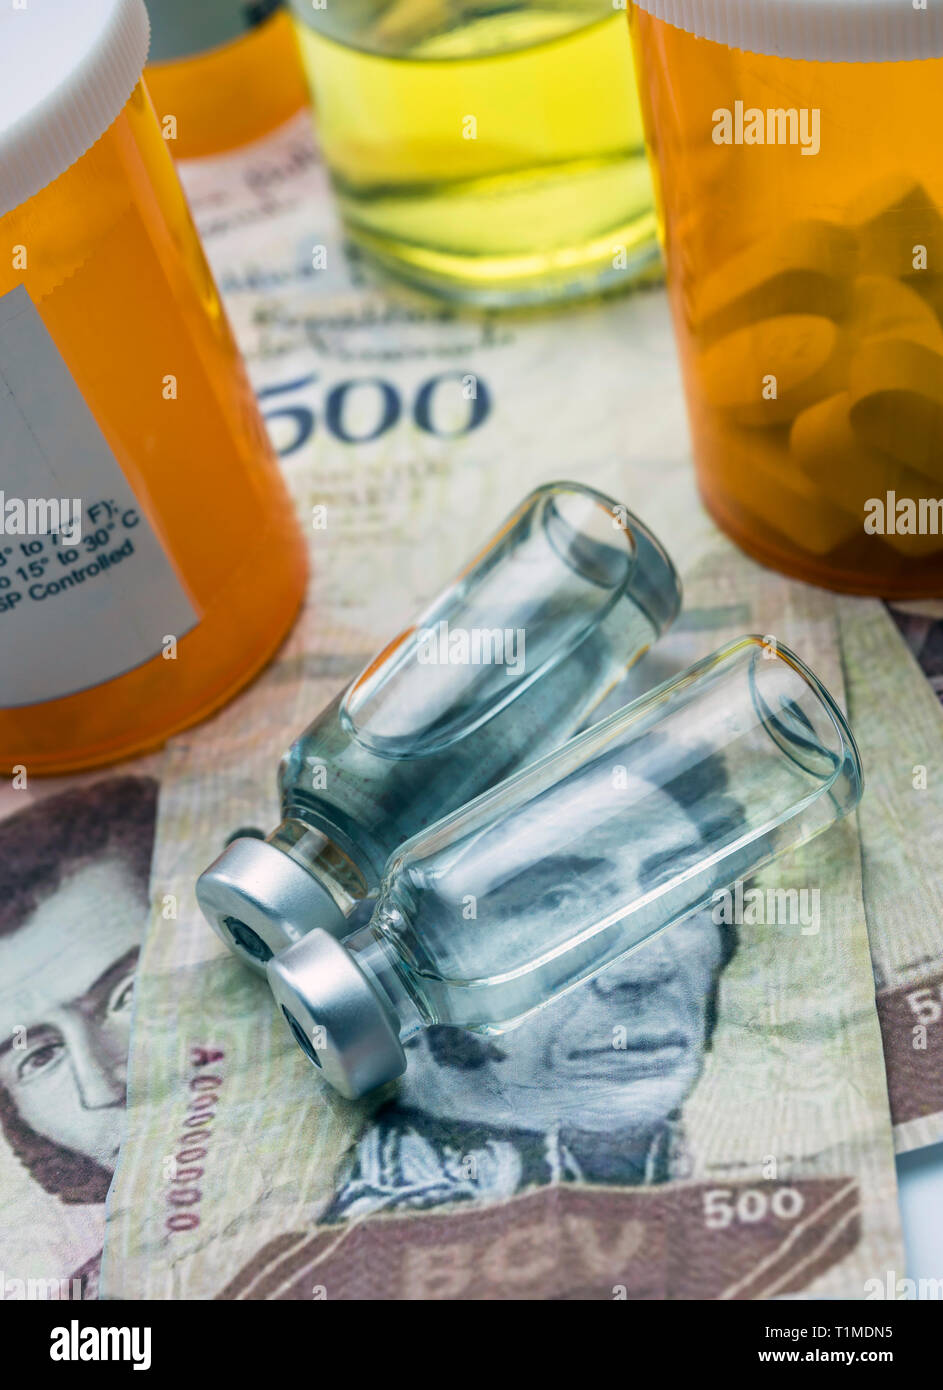 Vials with medication on banknotes Bolivarian, shady deal of medicines in full crisis of Latin American country, conceptual image Stock Photo